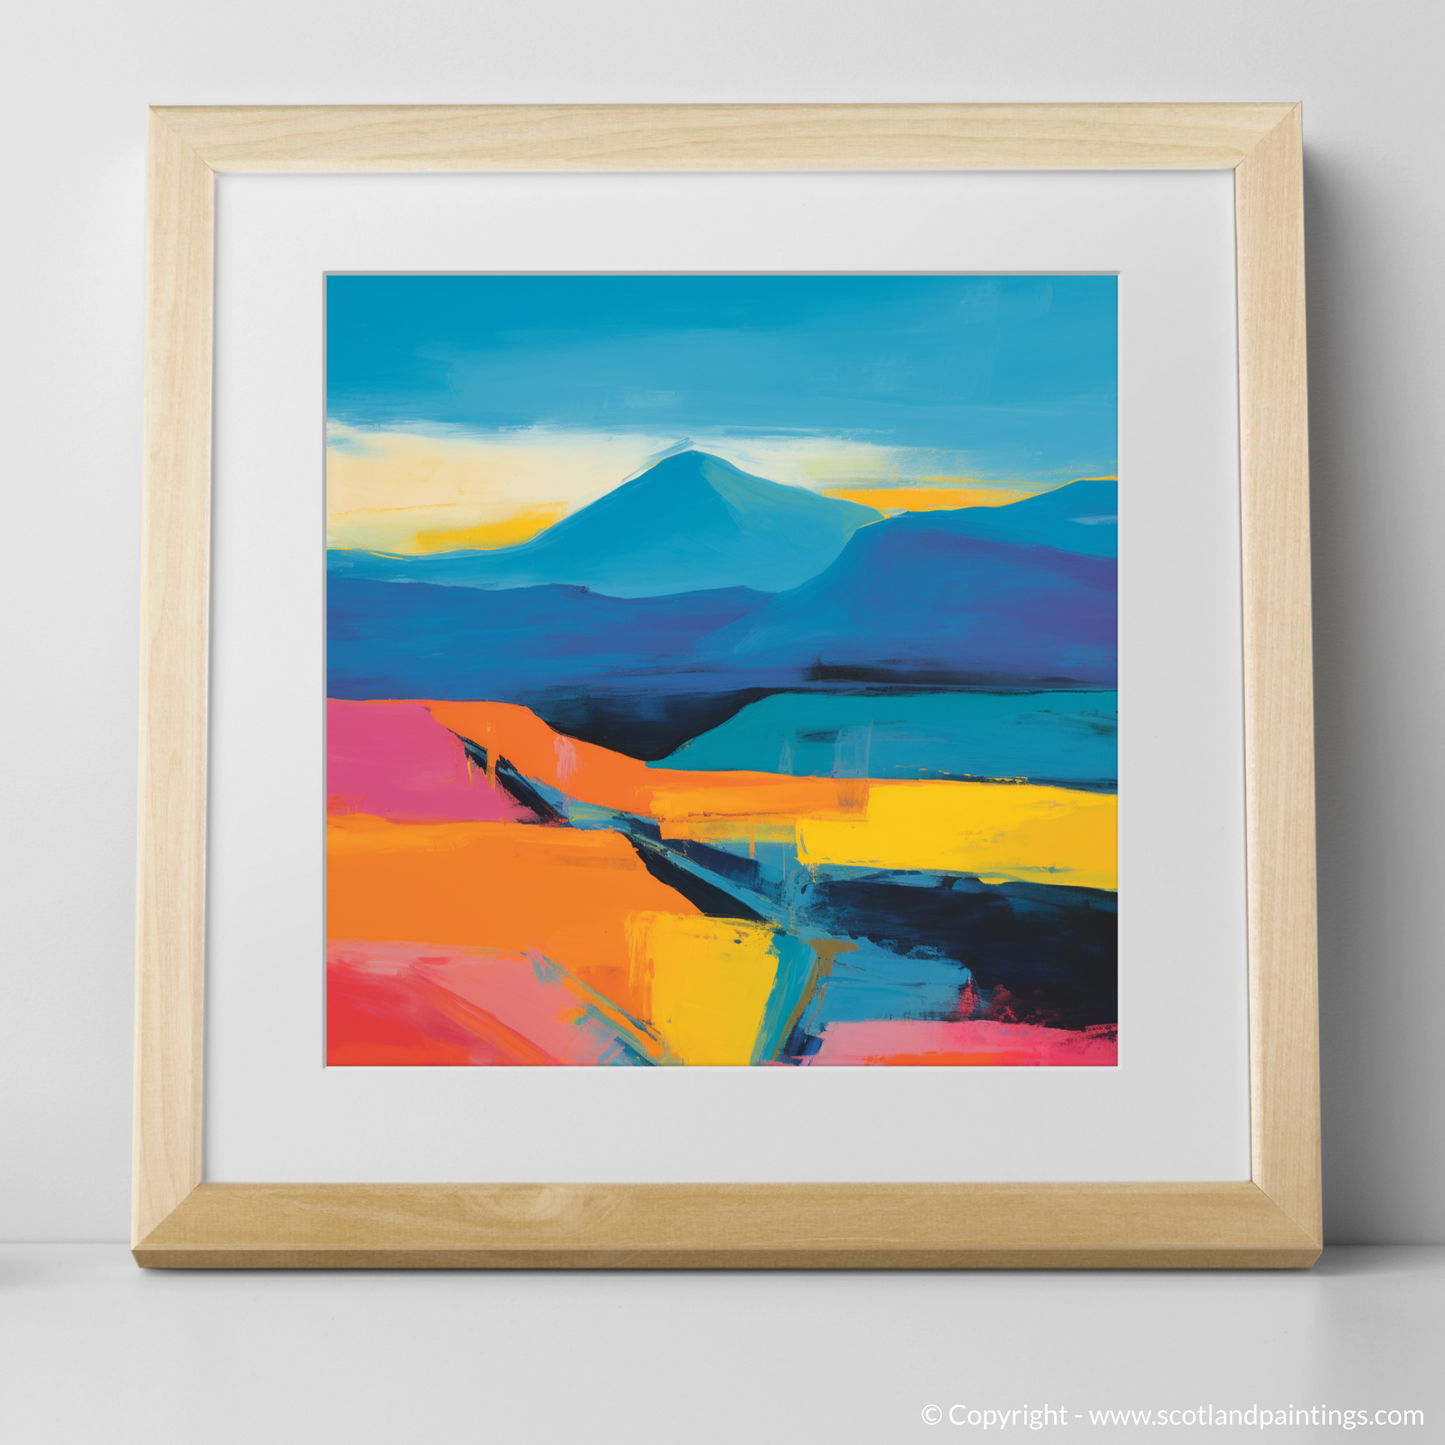 Art Print of The Cairnwell with a natural frame